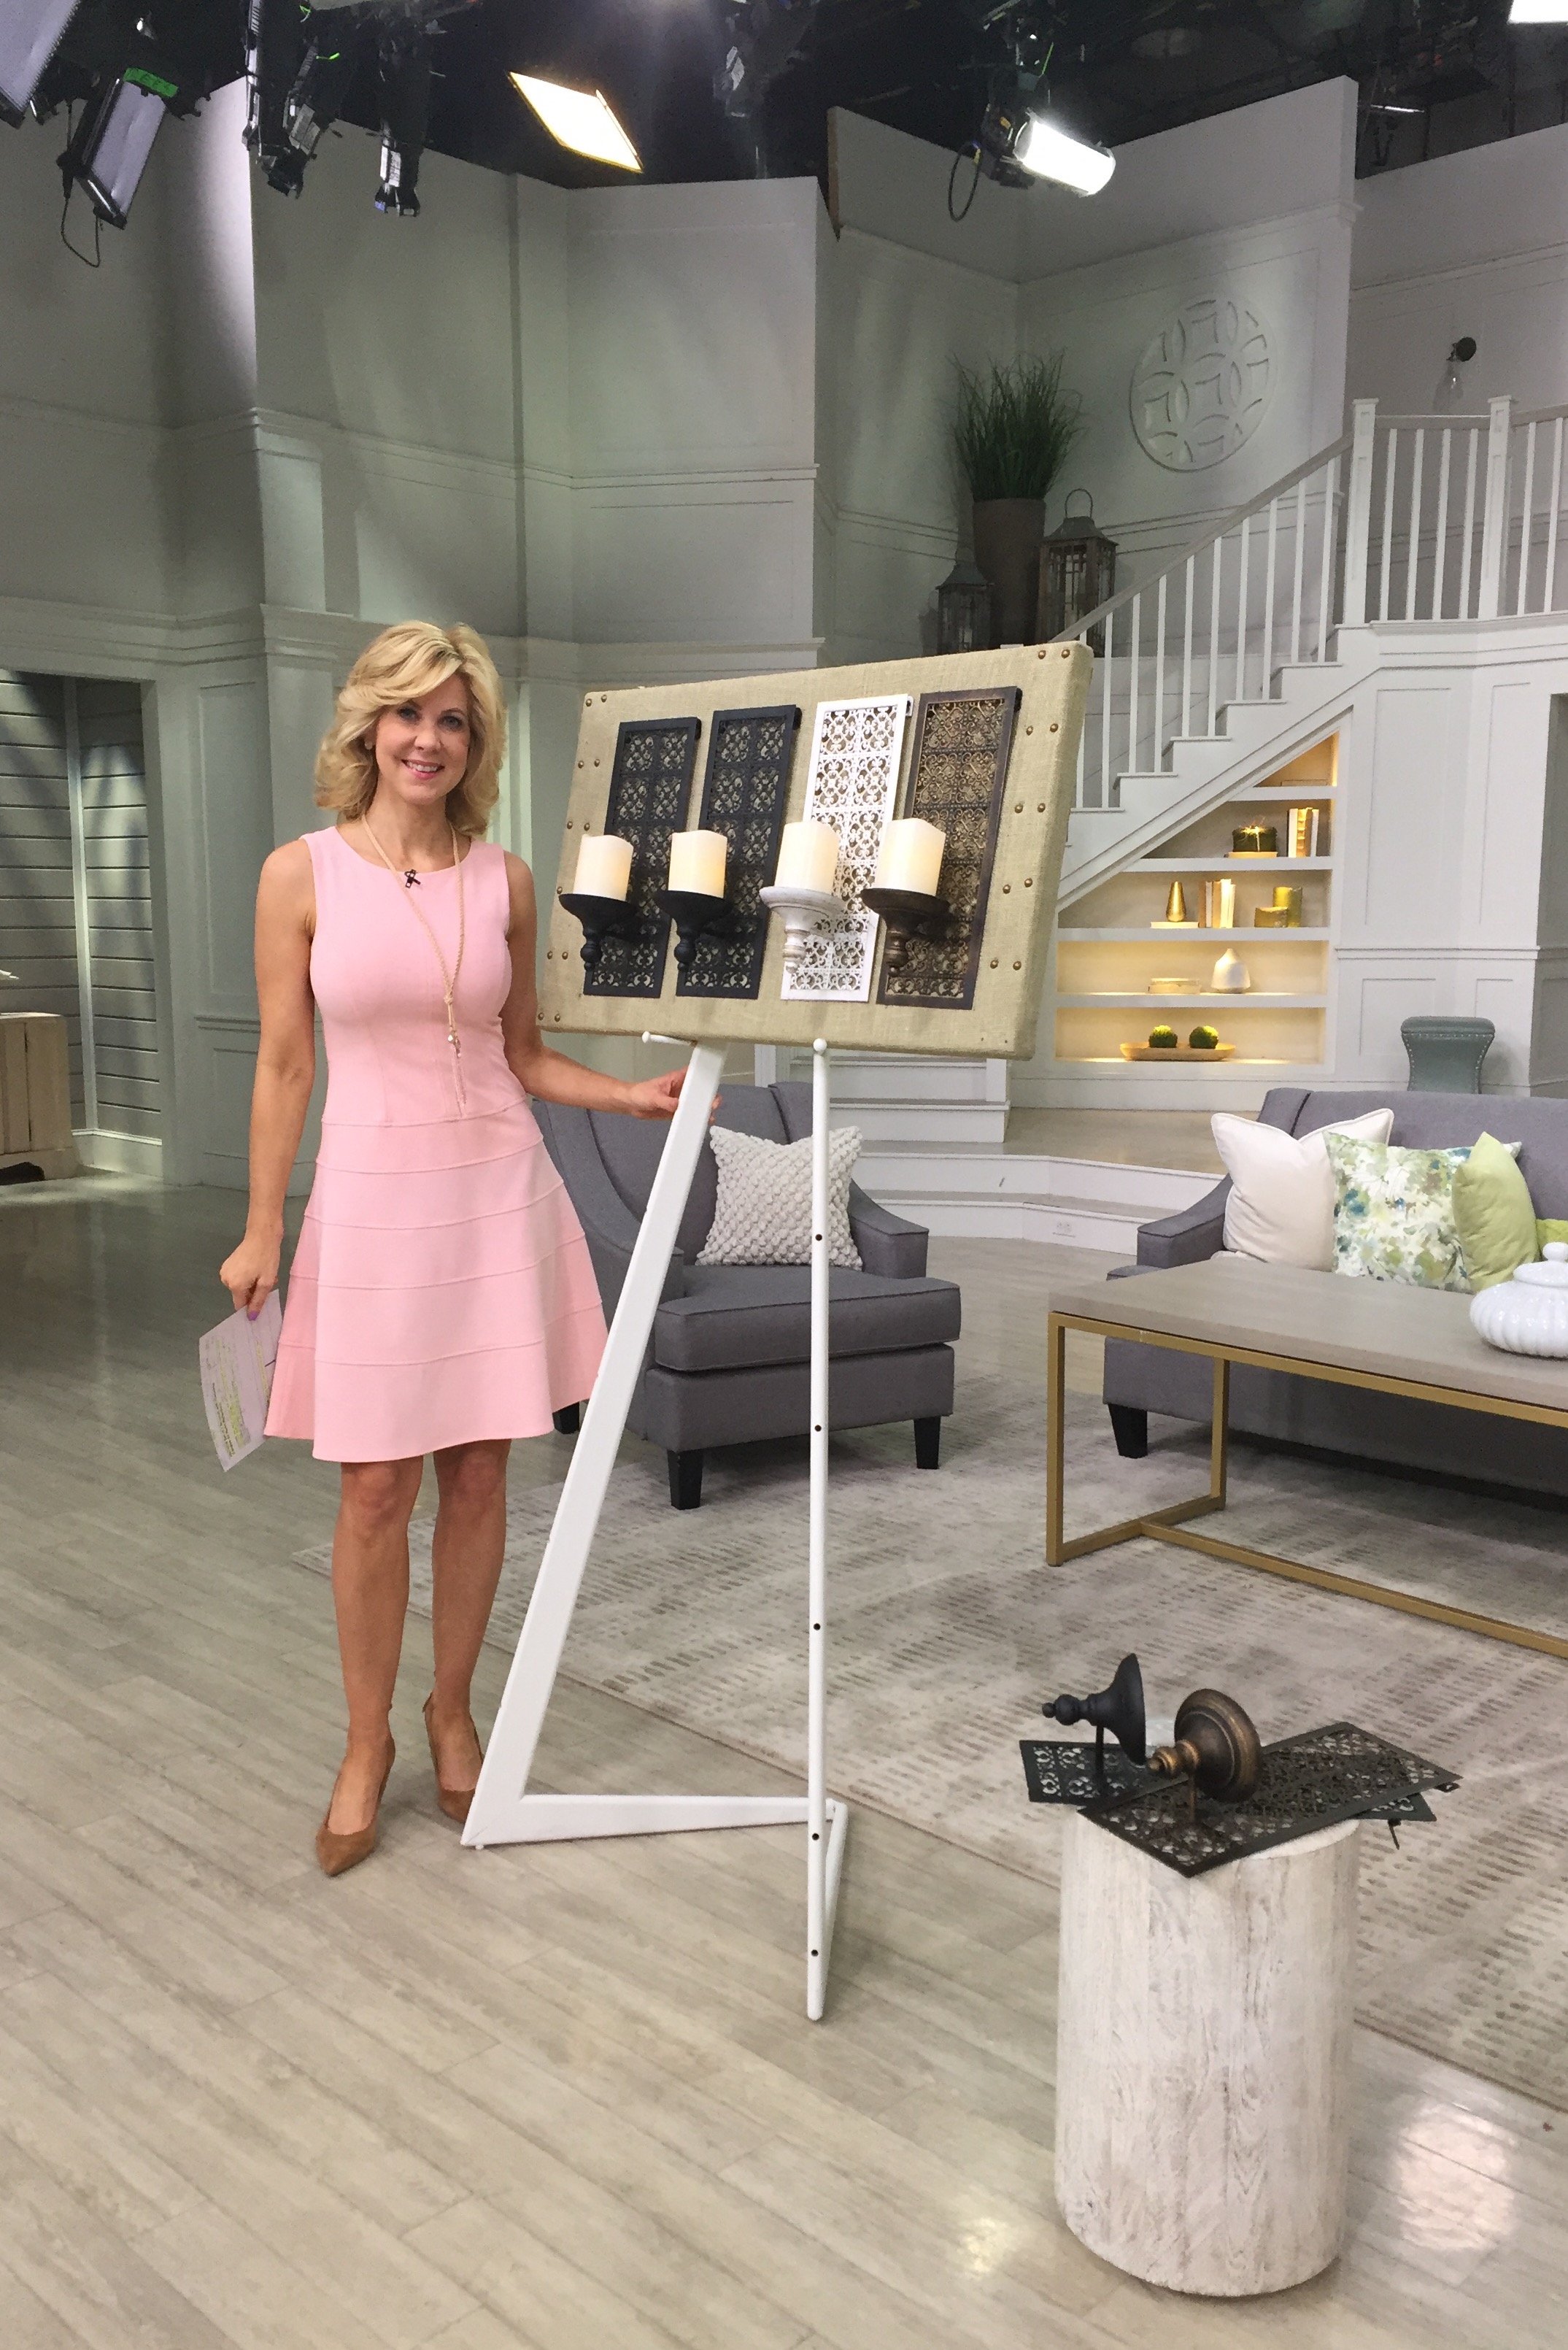 On QVC, FaceCradle will be represented by Amy Scaglione -- who has more than 12 years of experience as a national television spokesperson and is one of the lead trainers at QVC.